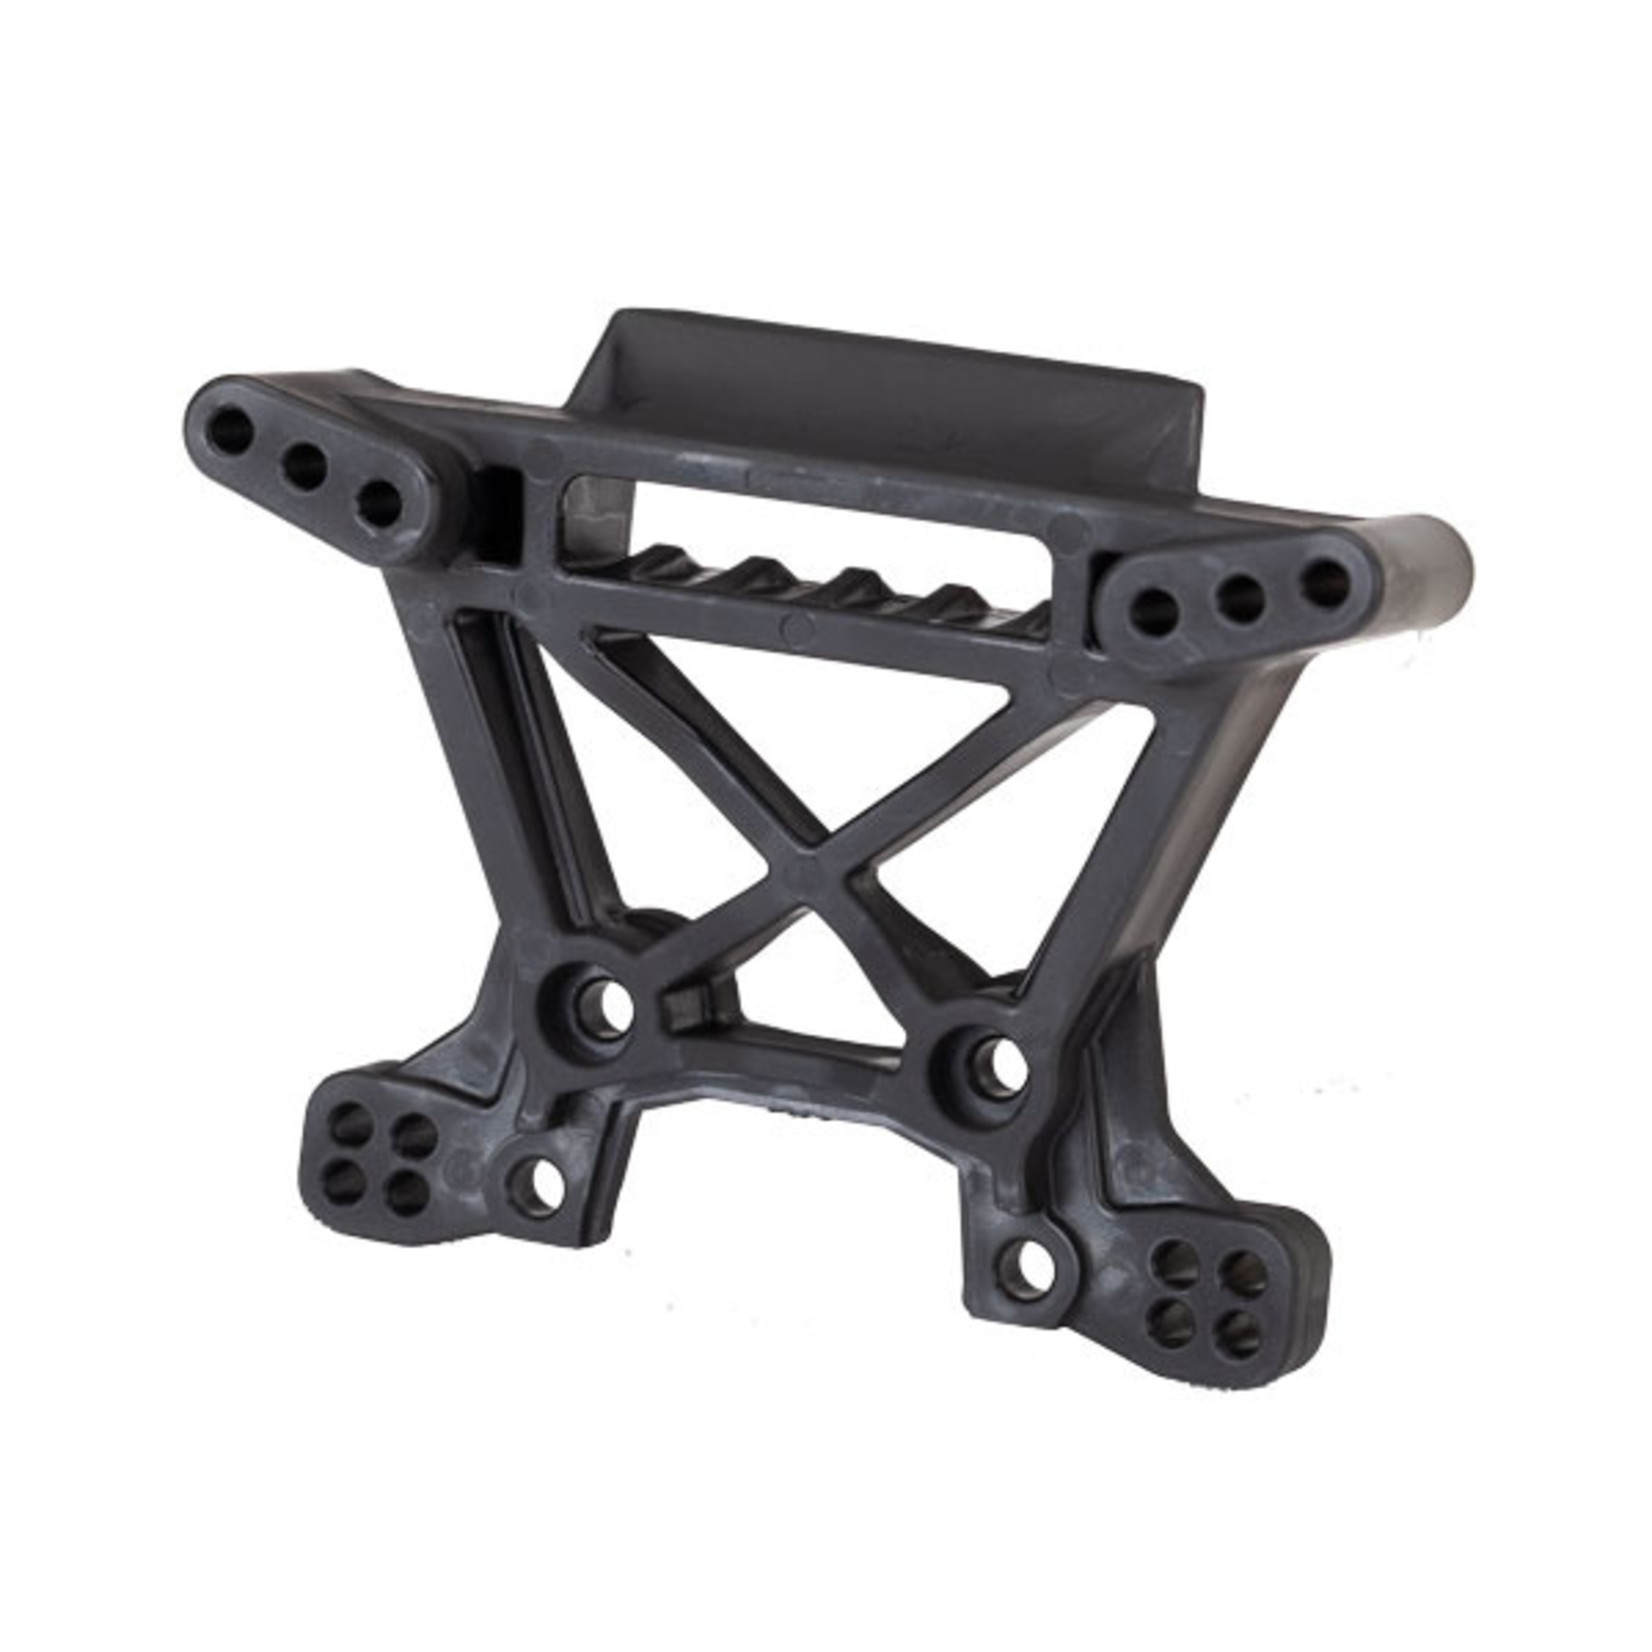 Traxxas 6739 - Shock tower, front